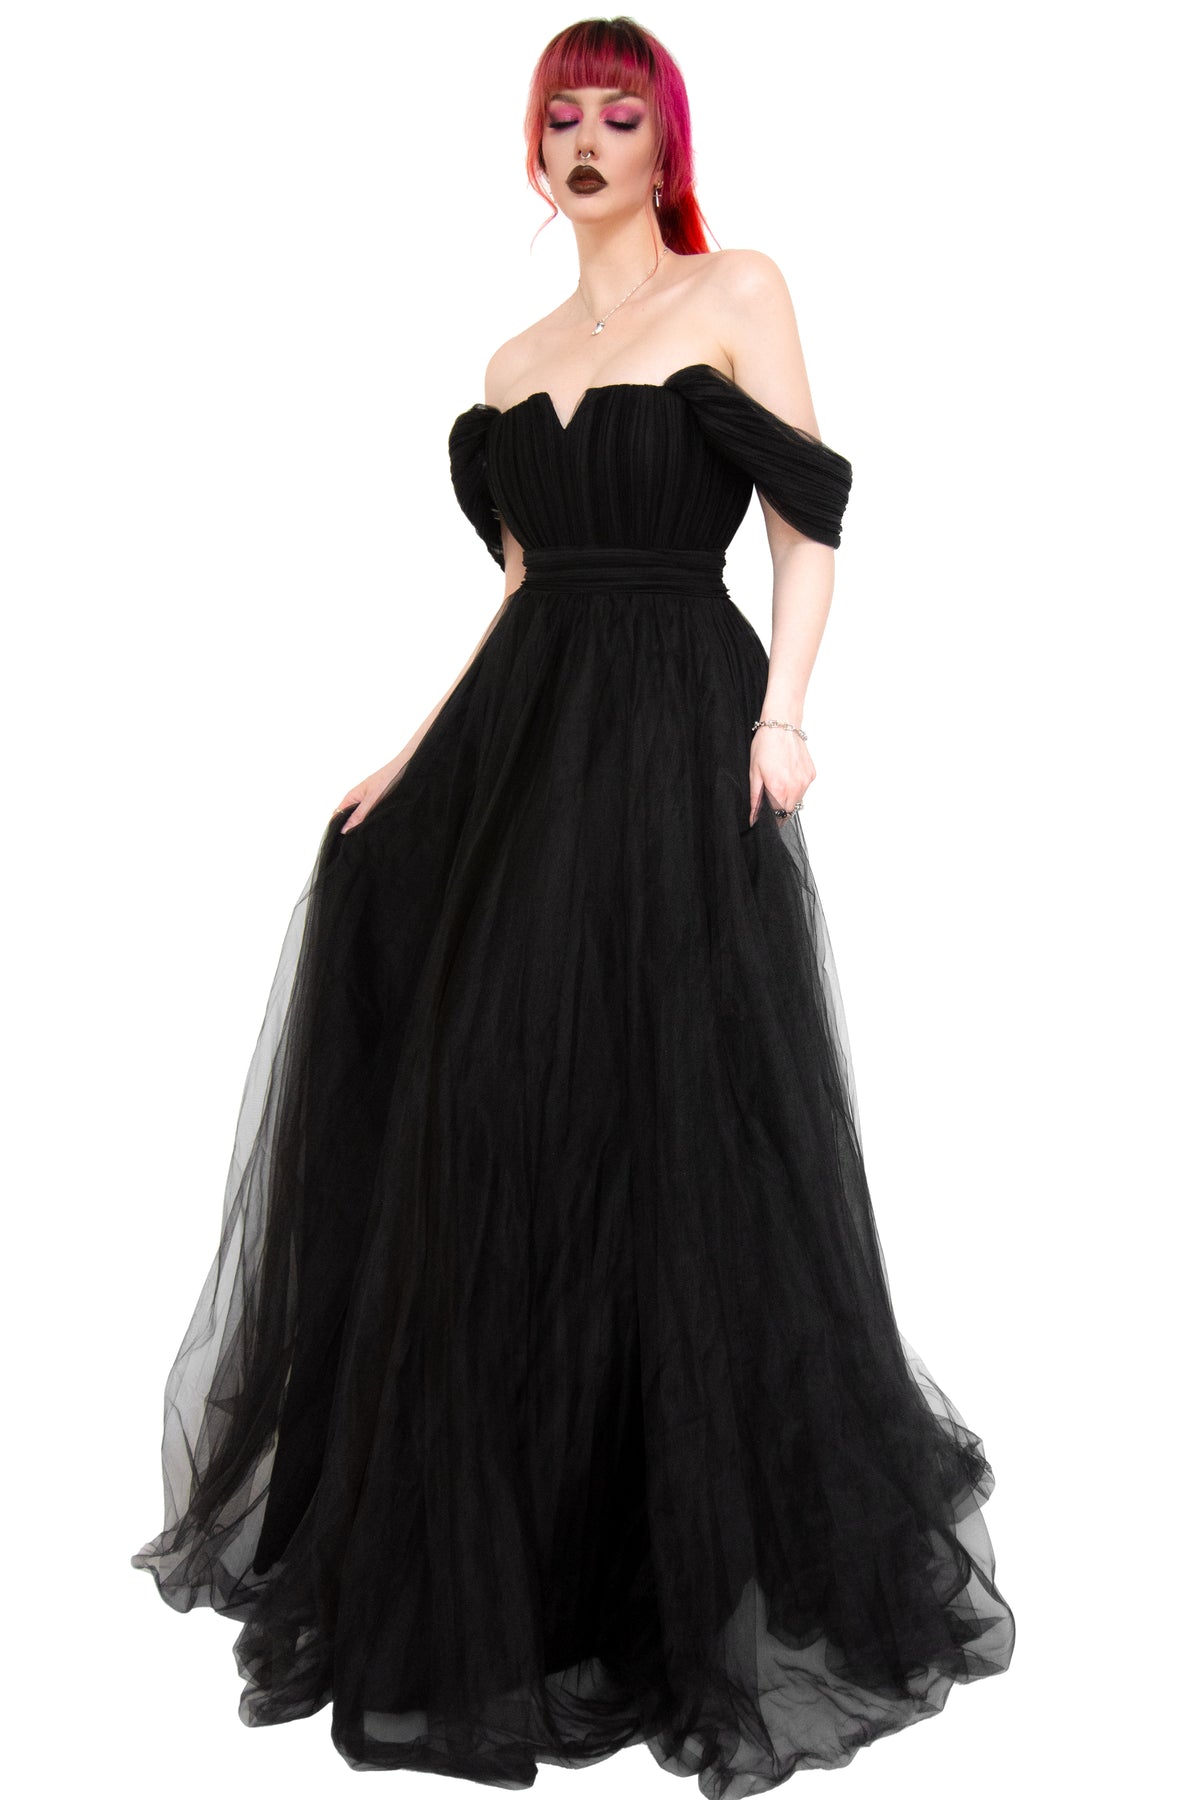 Elegant long flowing black tulle gown. Perfect for any goth wedding or special event! Off the shoulder, draping tulle sleeves and a mini V at the bust.